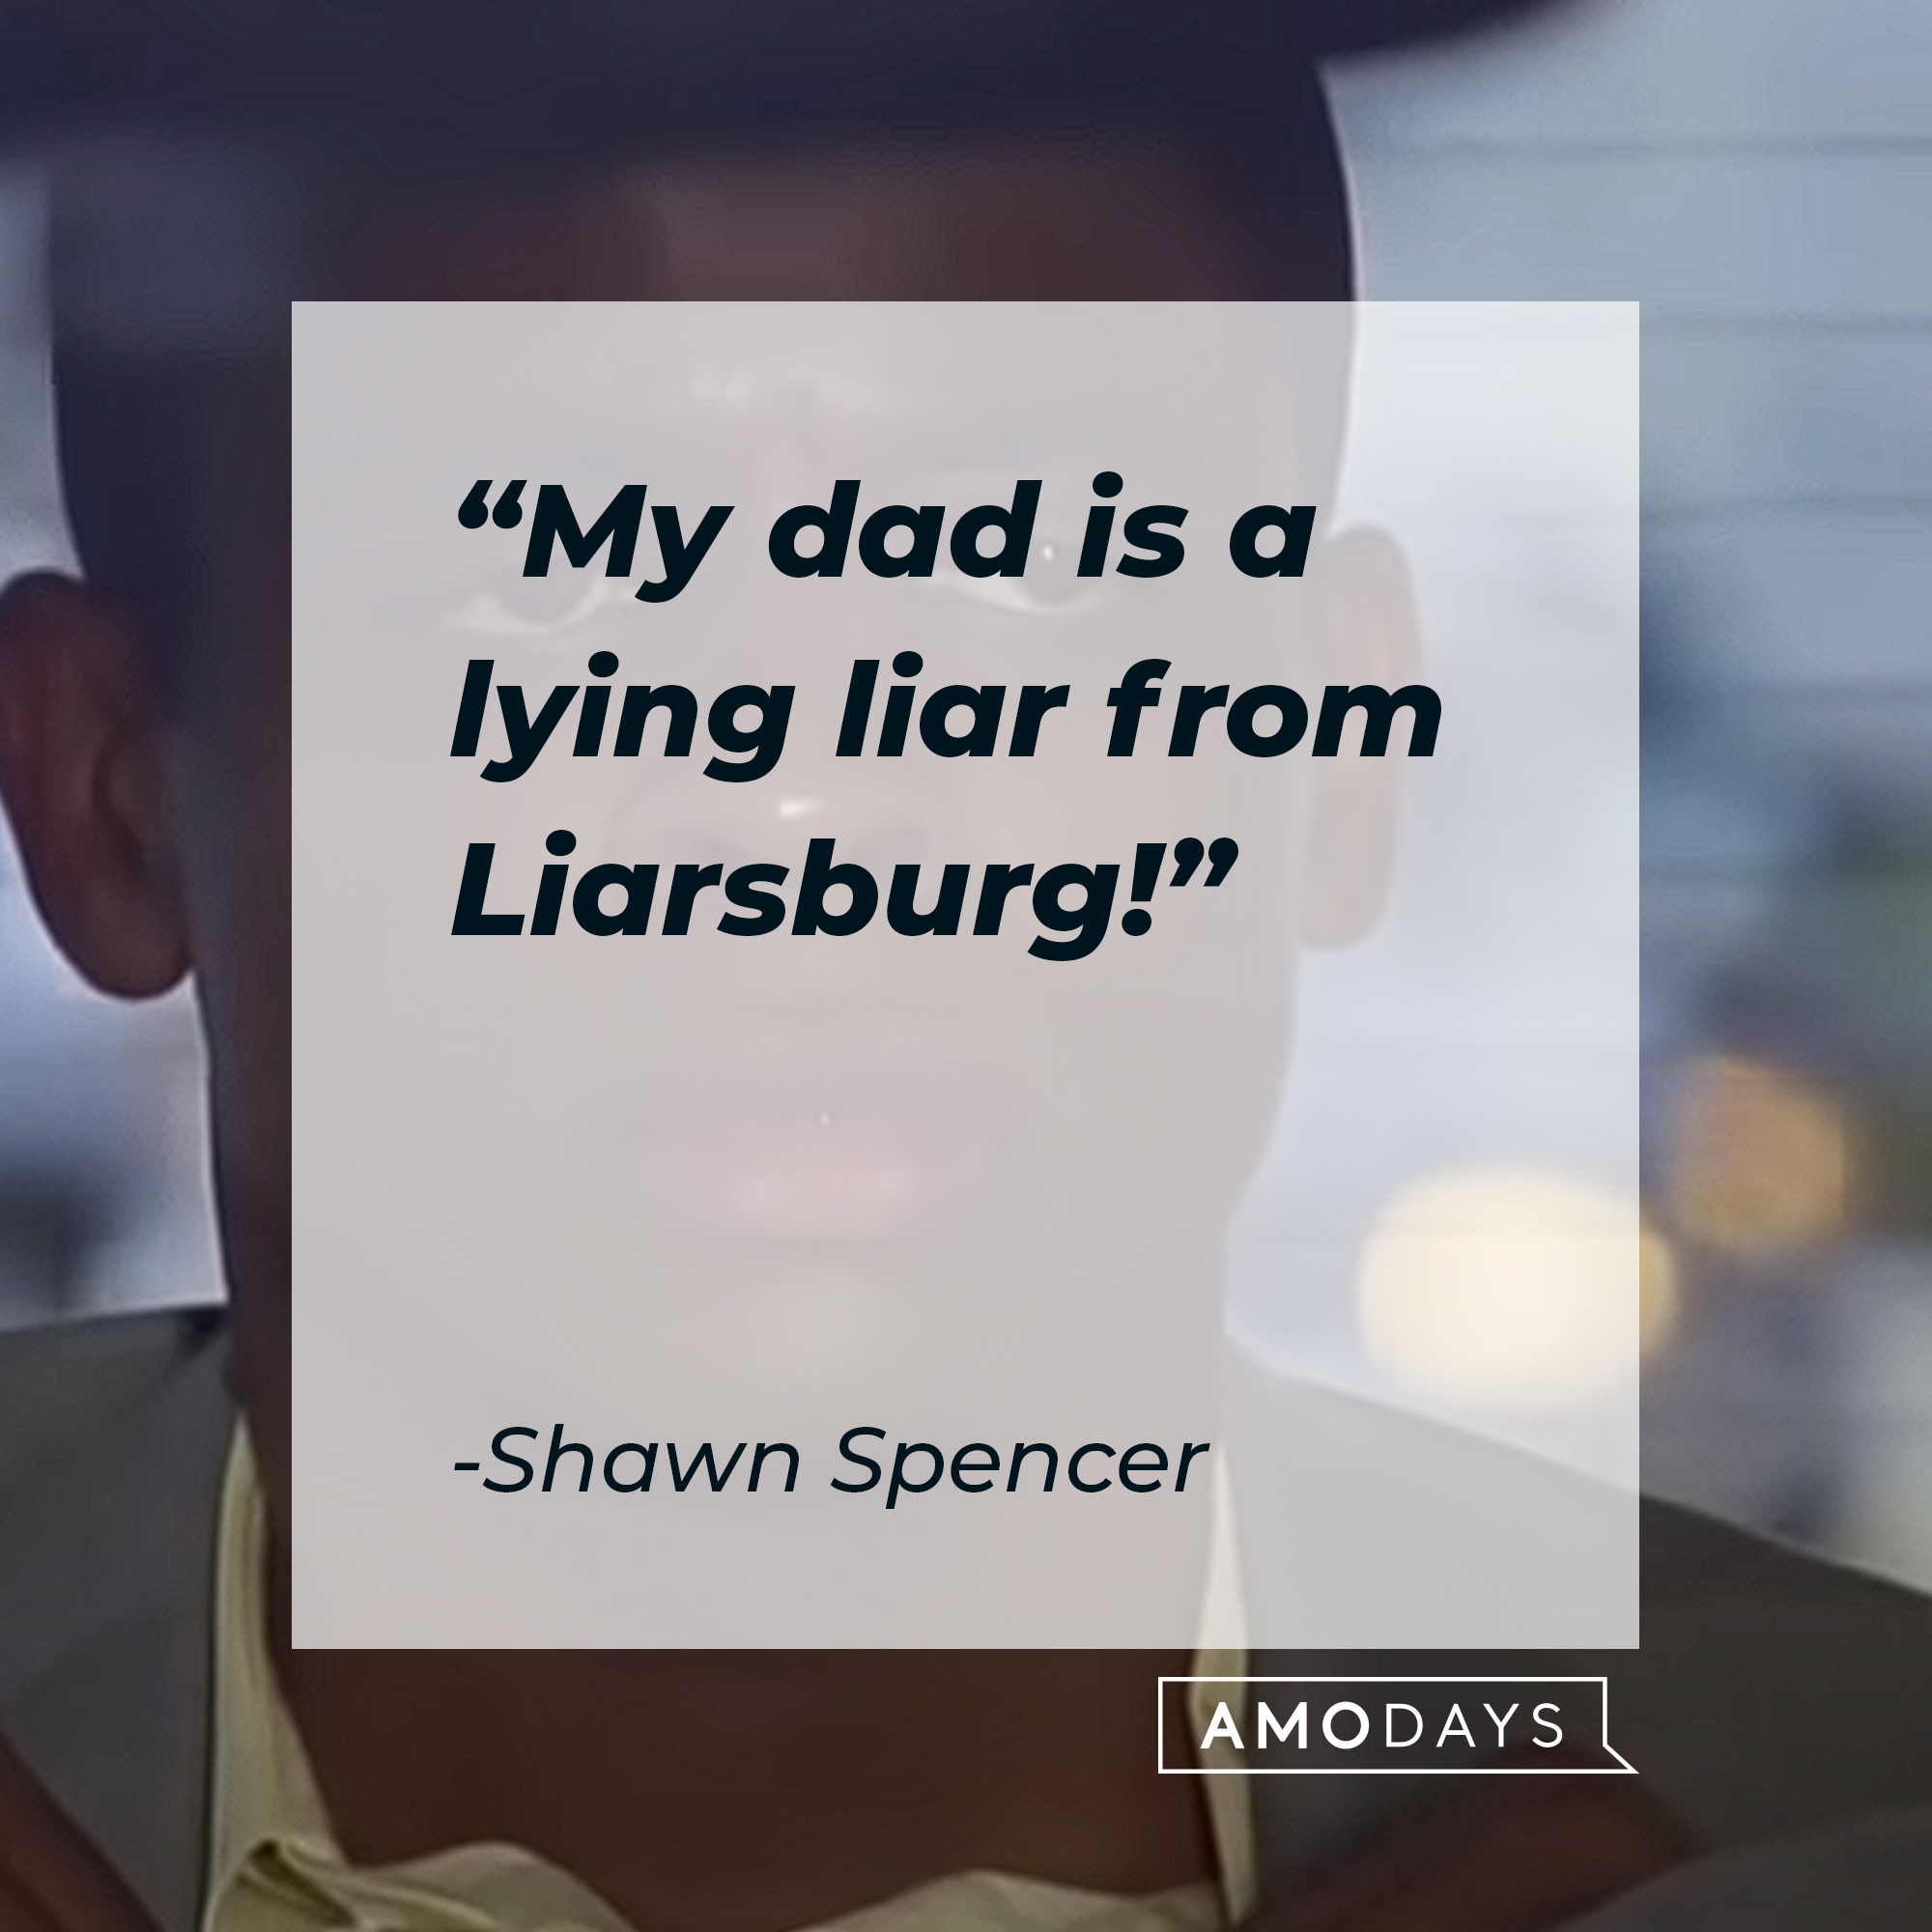 Shawn Spencer's quote: "My dad is a lying liar from Liarsburg!"  | Source: youtube.com/Psych